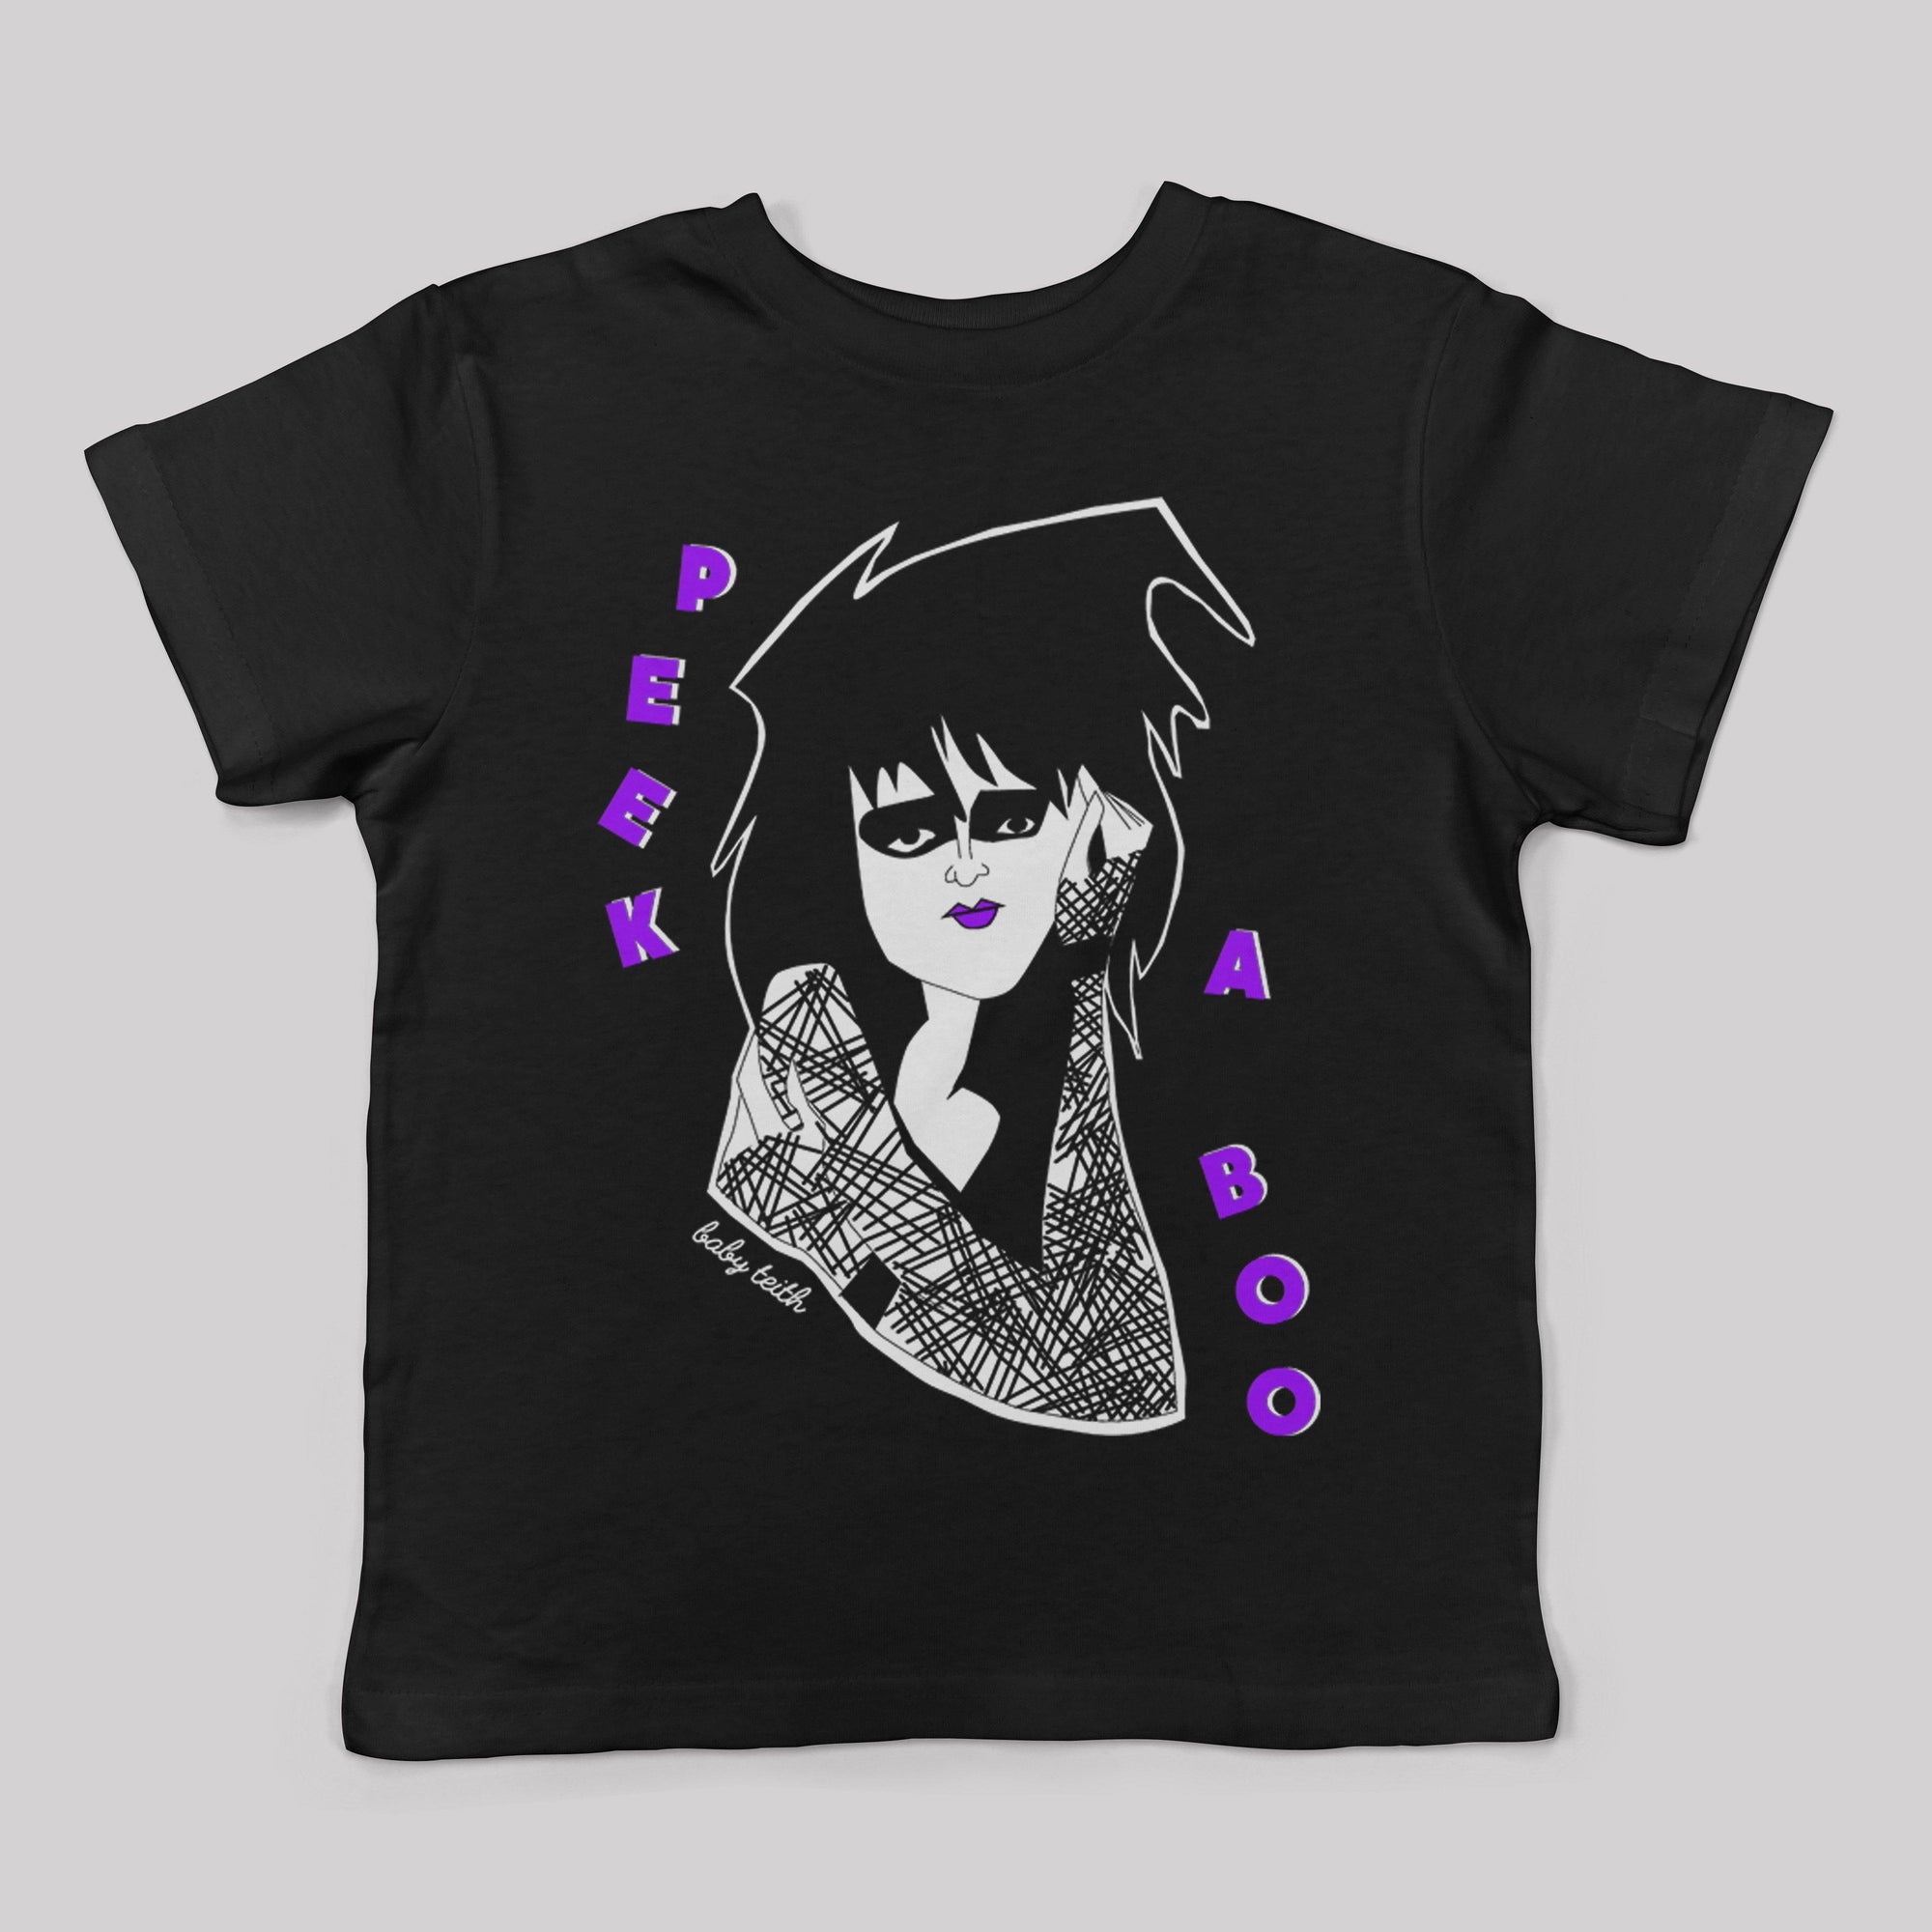 &quot;Peek-a-boo&quot; Siouxsie Sioux Inspired Tee for Kids - Baby Teith